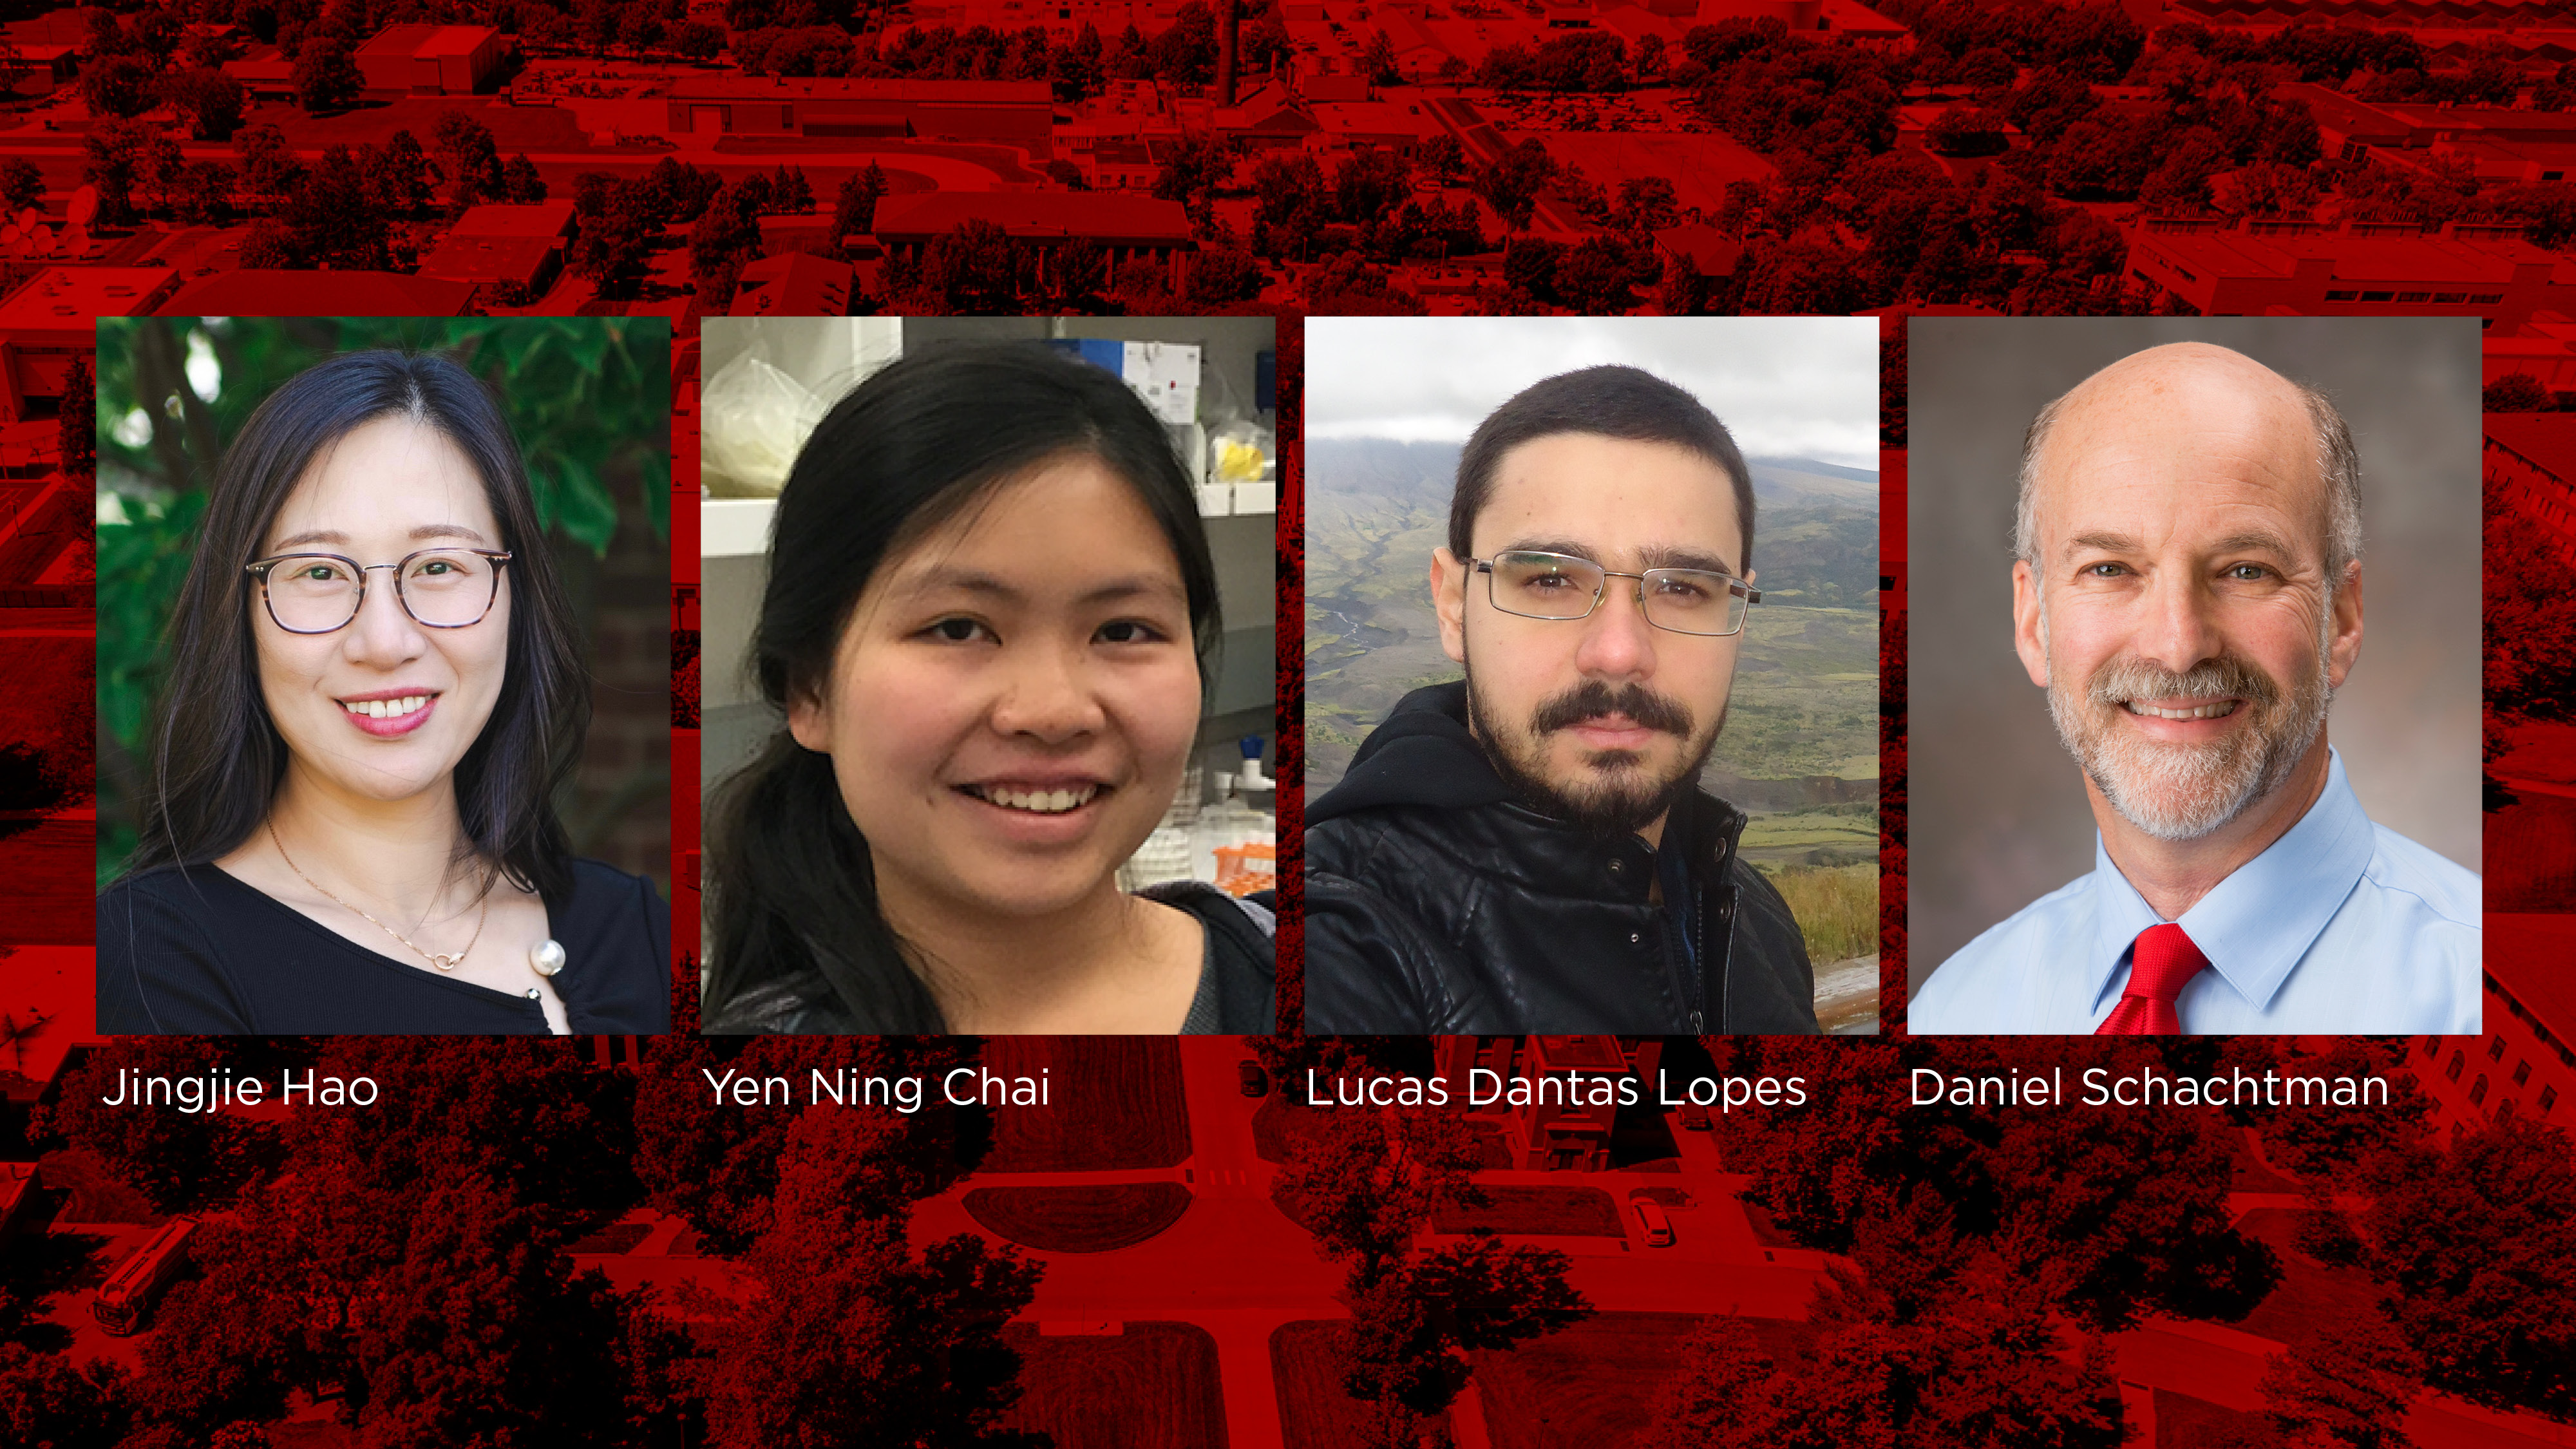 A research article about microbial communities in soil depths was authored by University of Nebraska–Lincoln researchers Jingjie Hao, Yen Ning Chai, Lucas Dantas Lopes and Daniel Schachtman and Iowa State University researchers. 